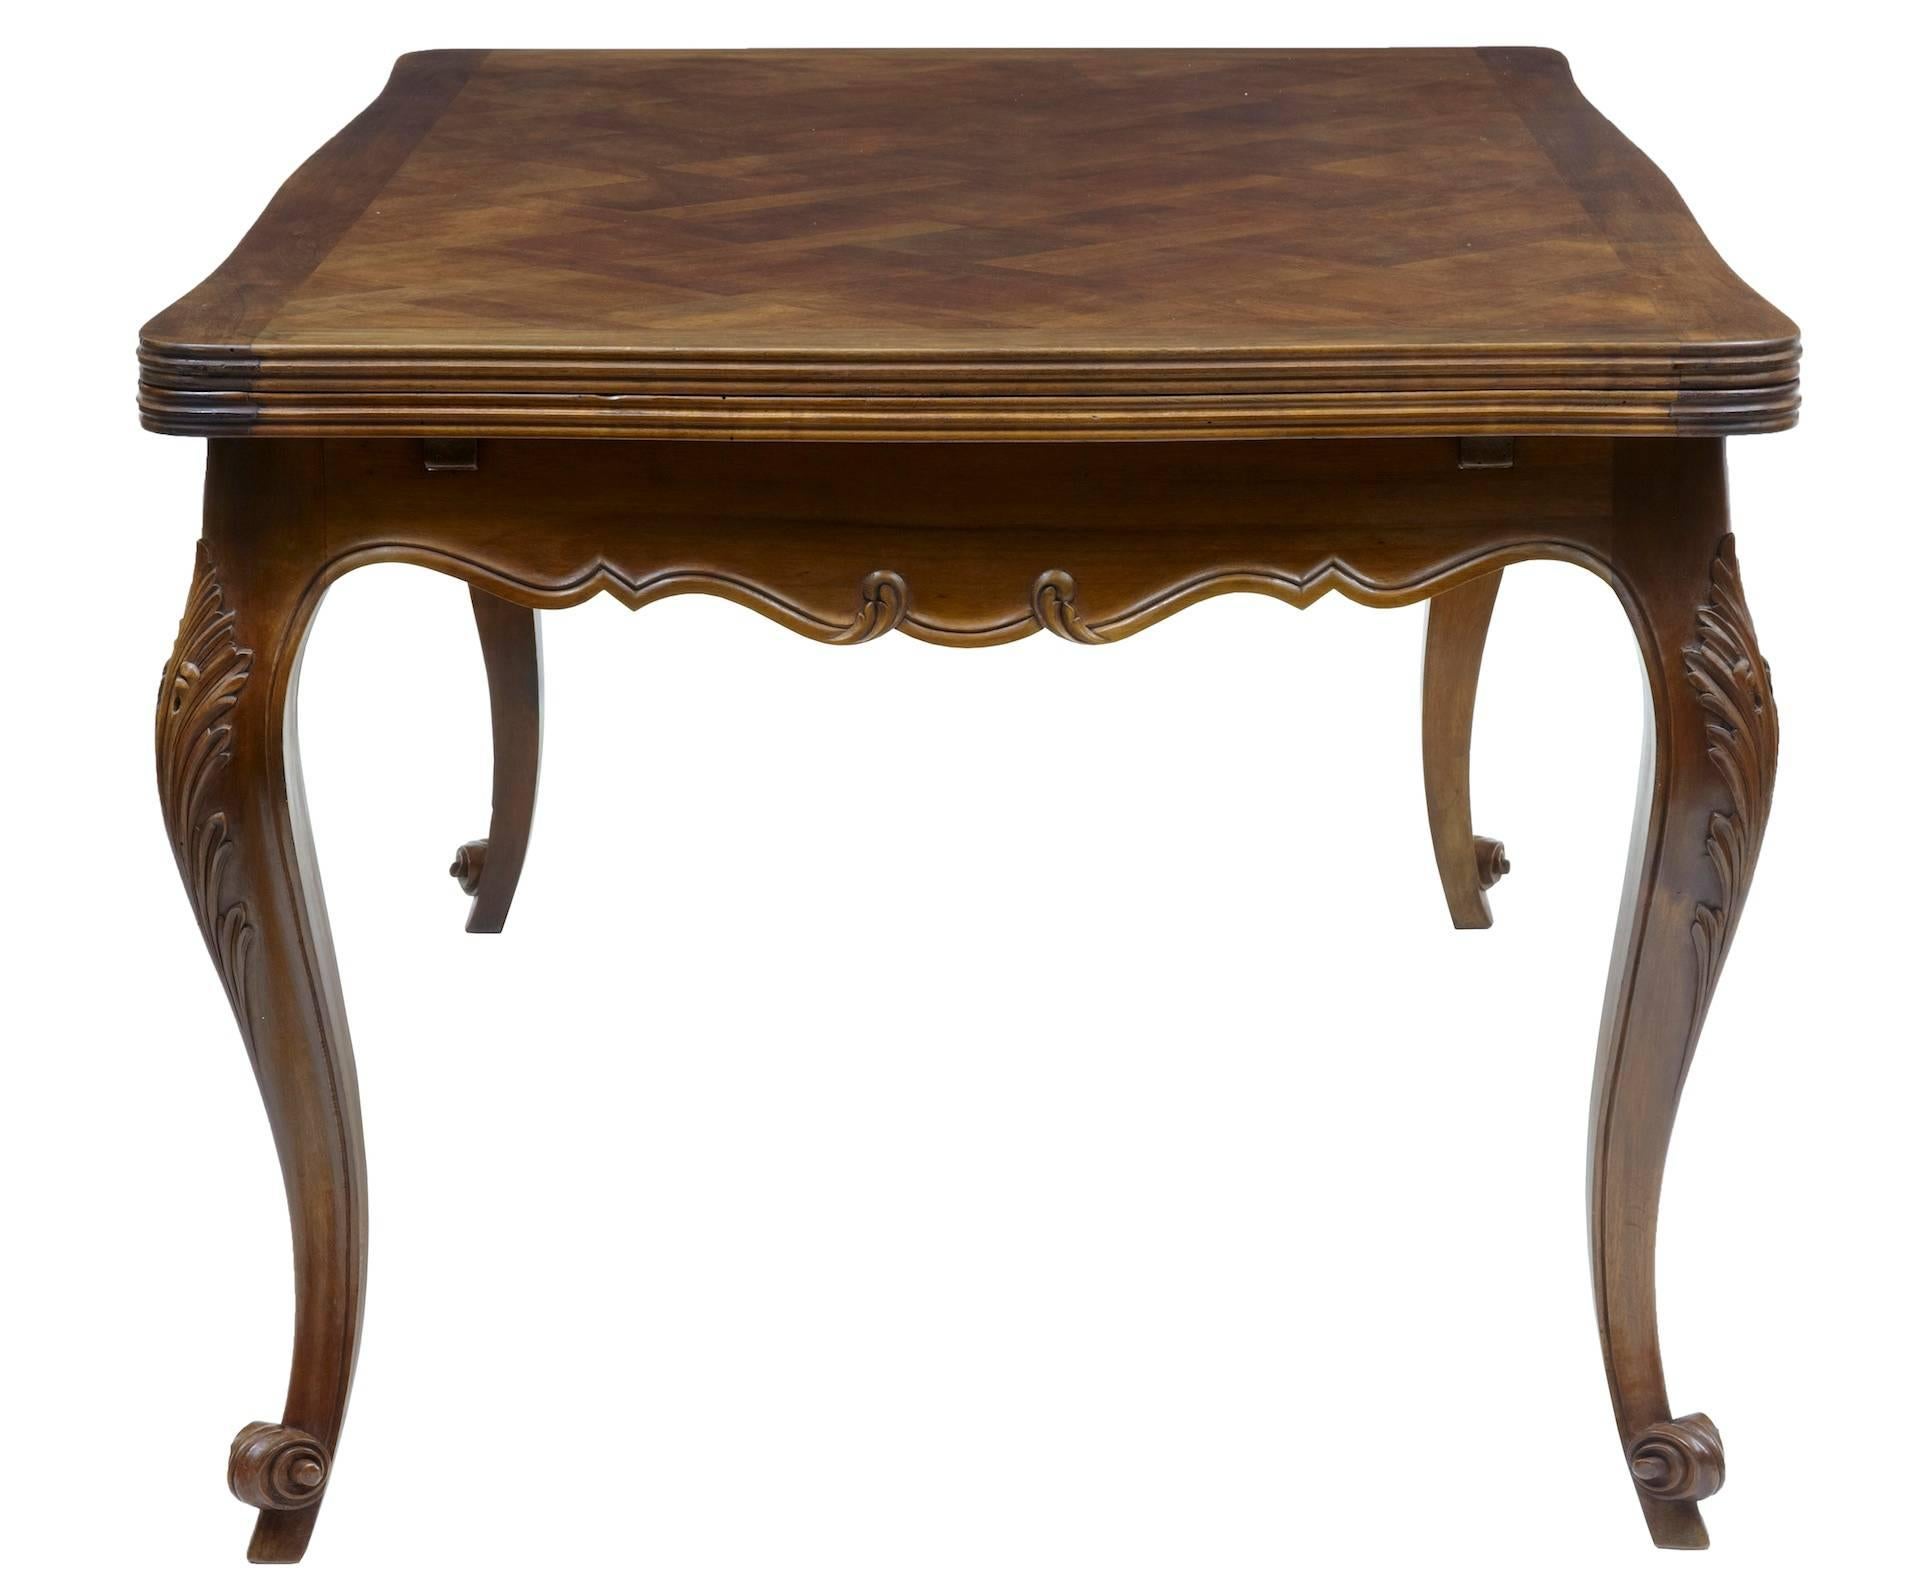 French Provincial 20th Century French Walnut Parquetry Extending Dining Table